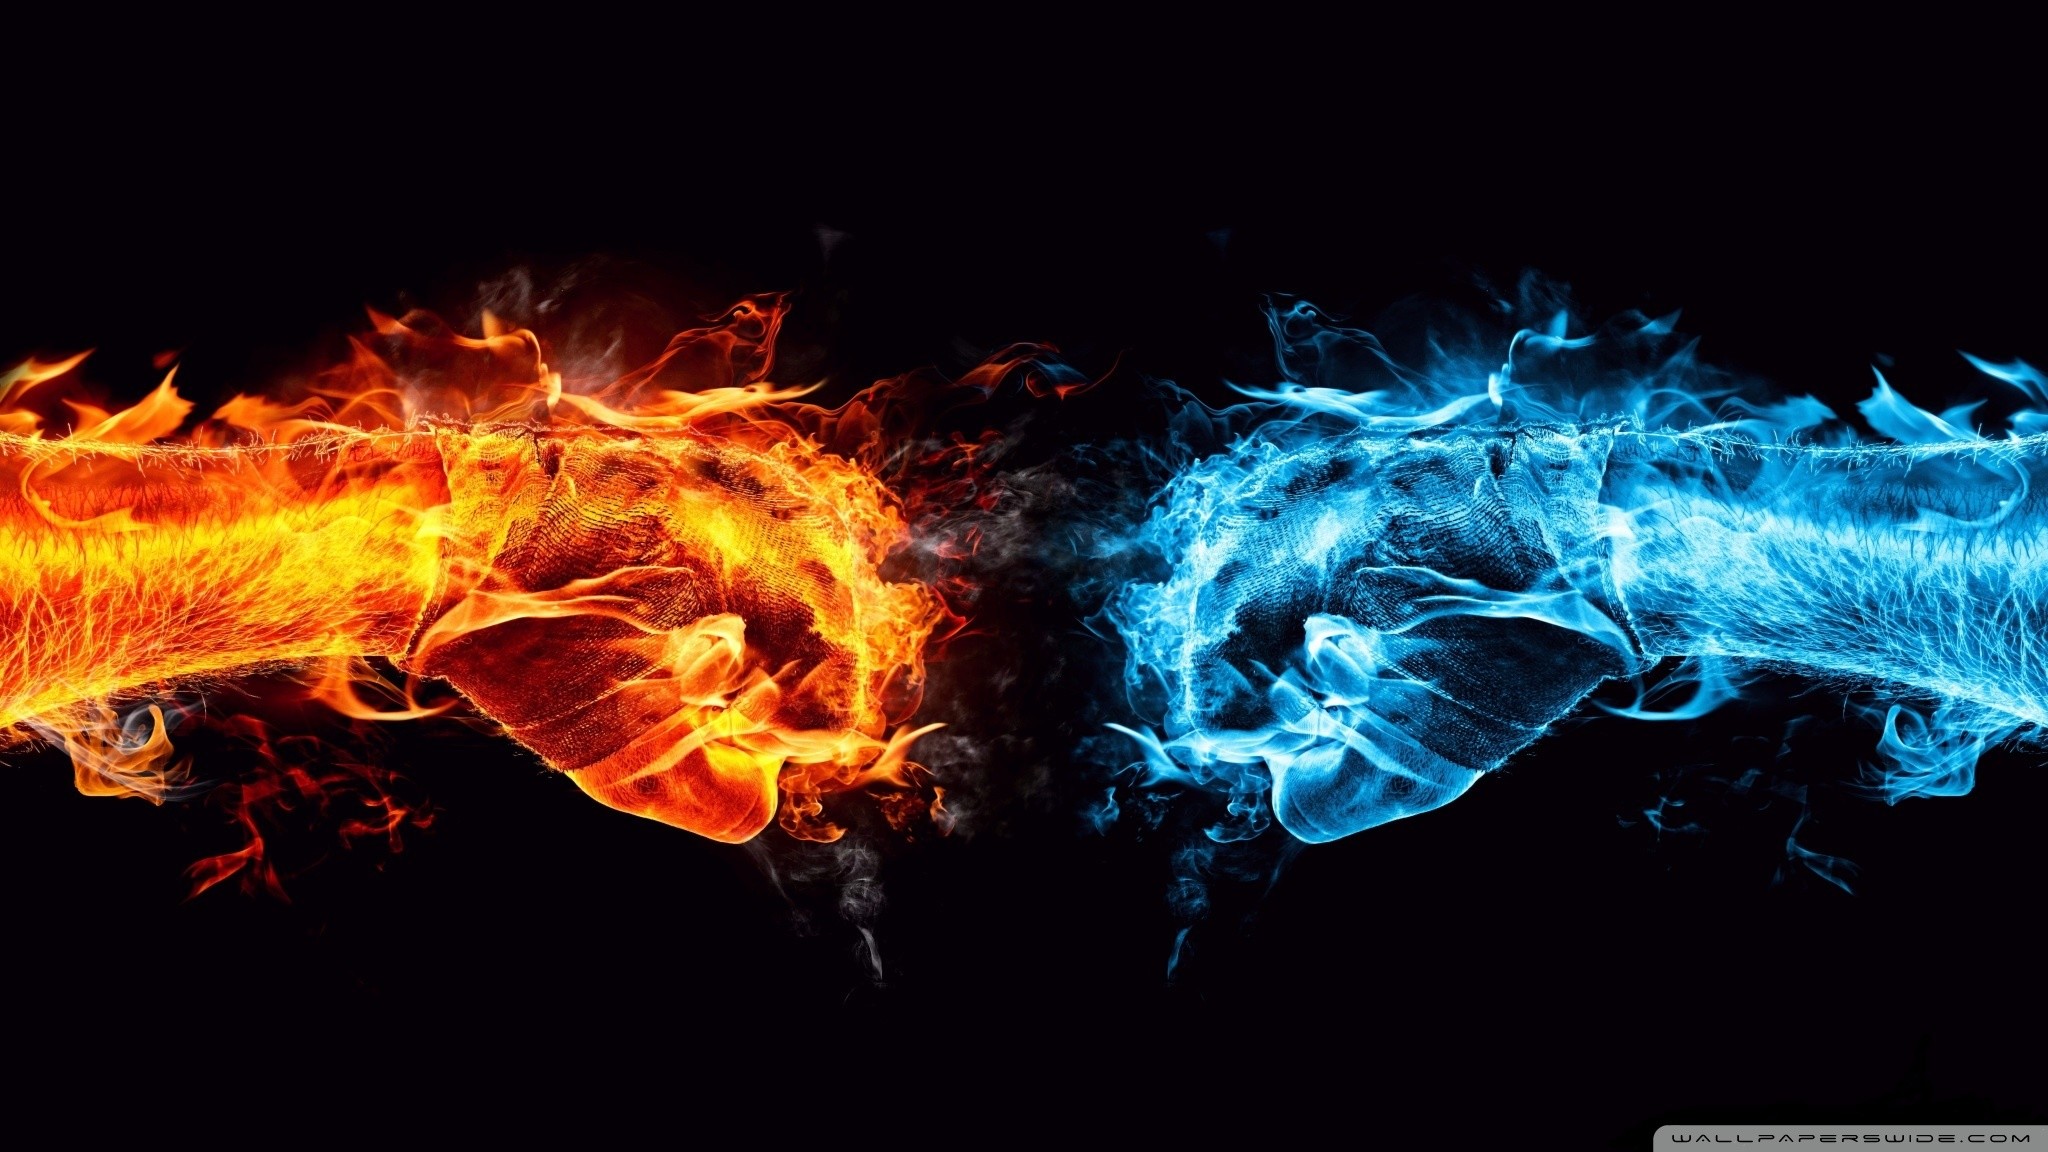 2048x1152 Fire And Ice Awesome Photo | 4288903 Fire And Ice Wallpapers, 